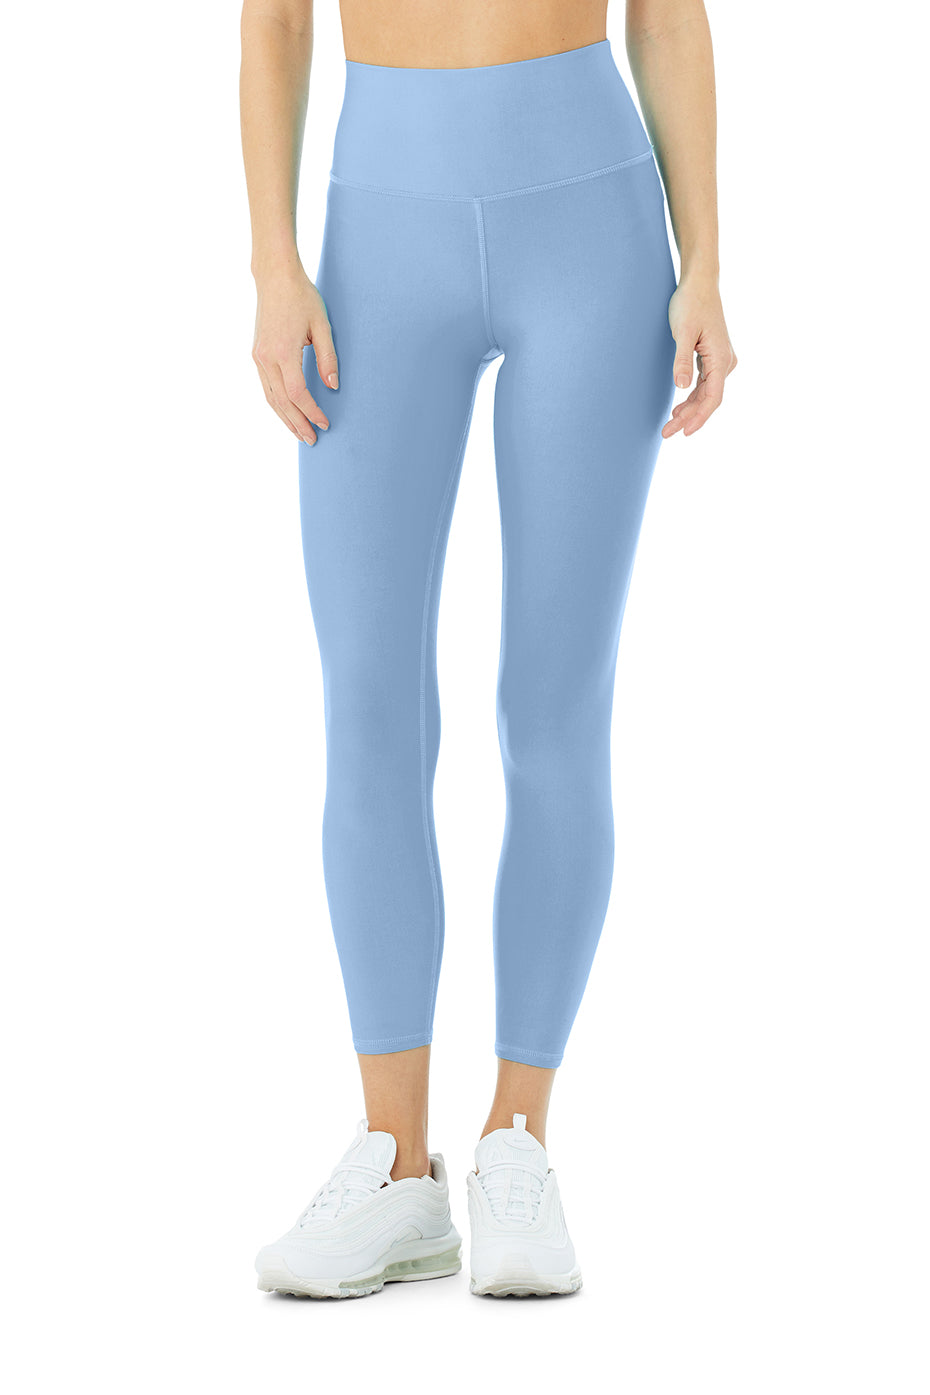 7/8 High-Waist Airlift Legging in Blue Skies by Alo Yoga